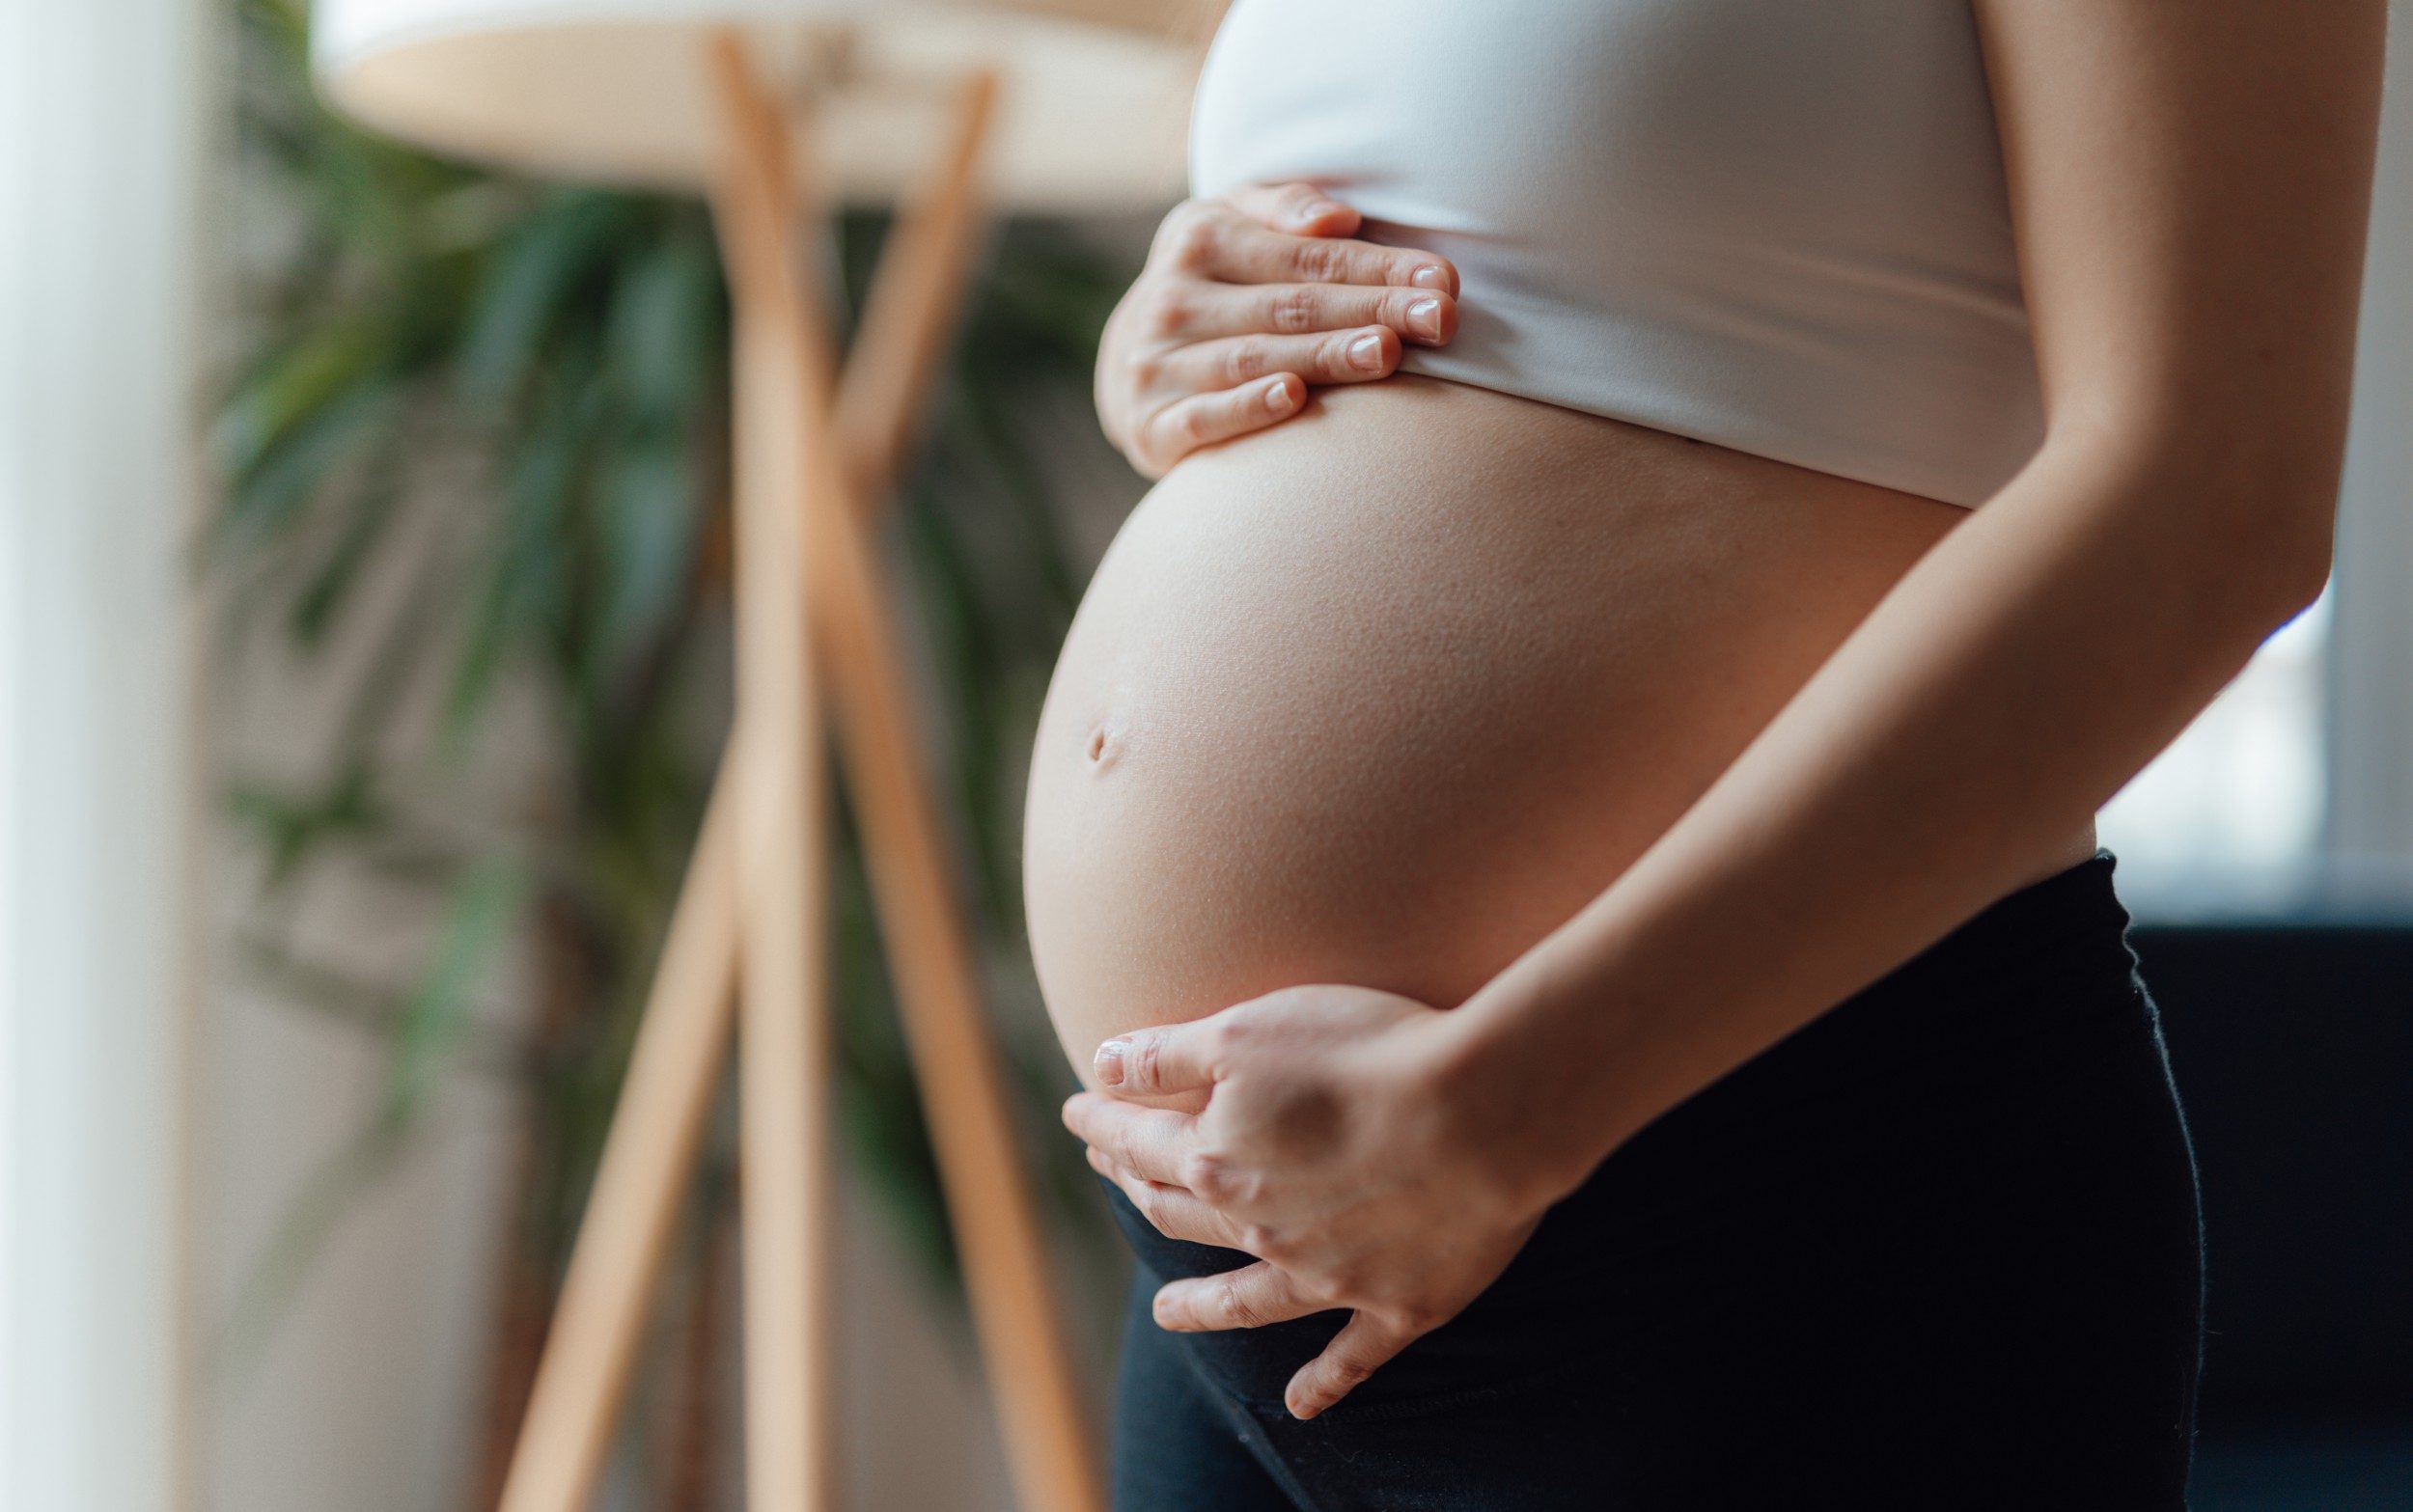 weight-loss drug ozempic could lead to birth defects